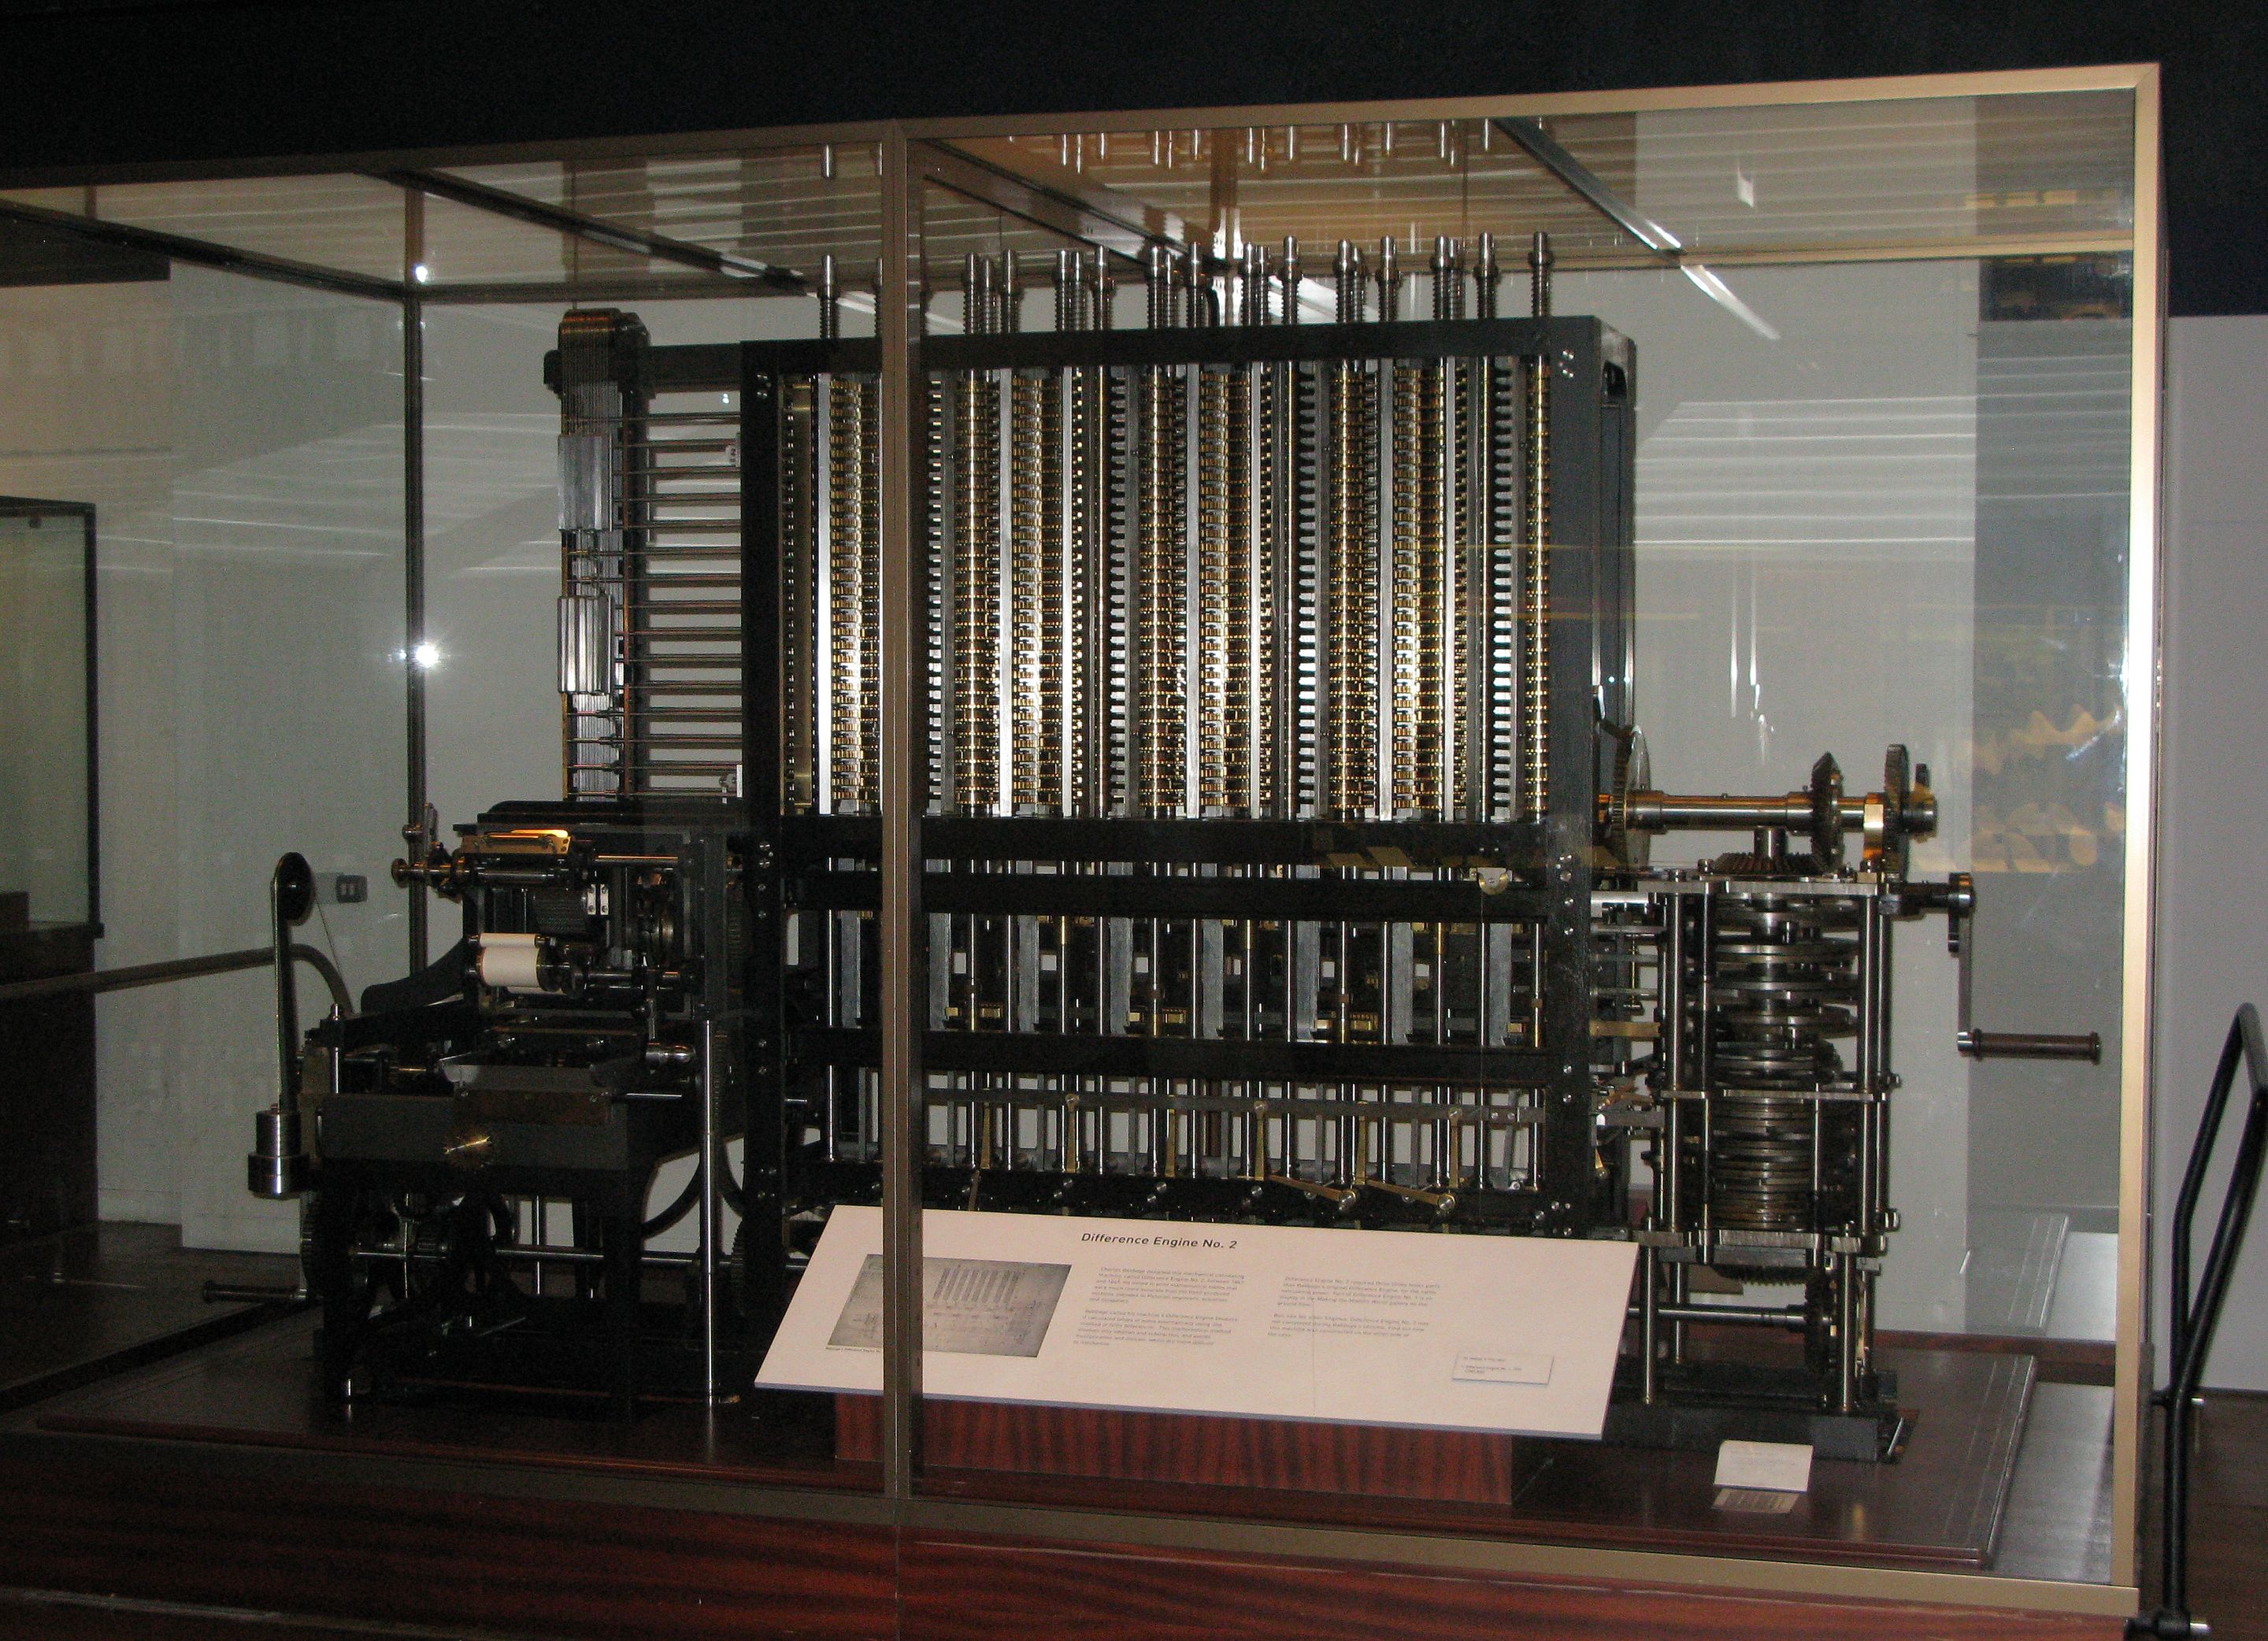 2880px-Babbage_Difference_Engine.jpg